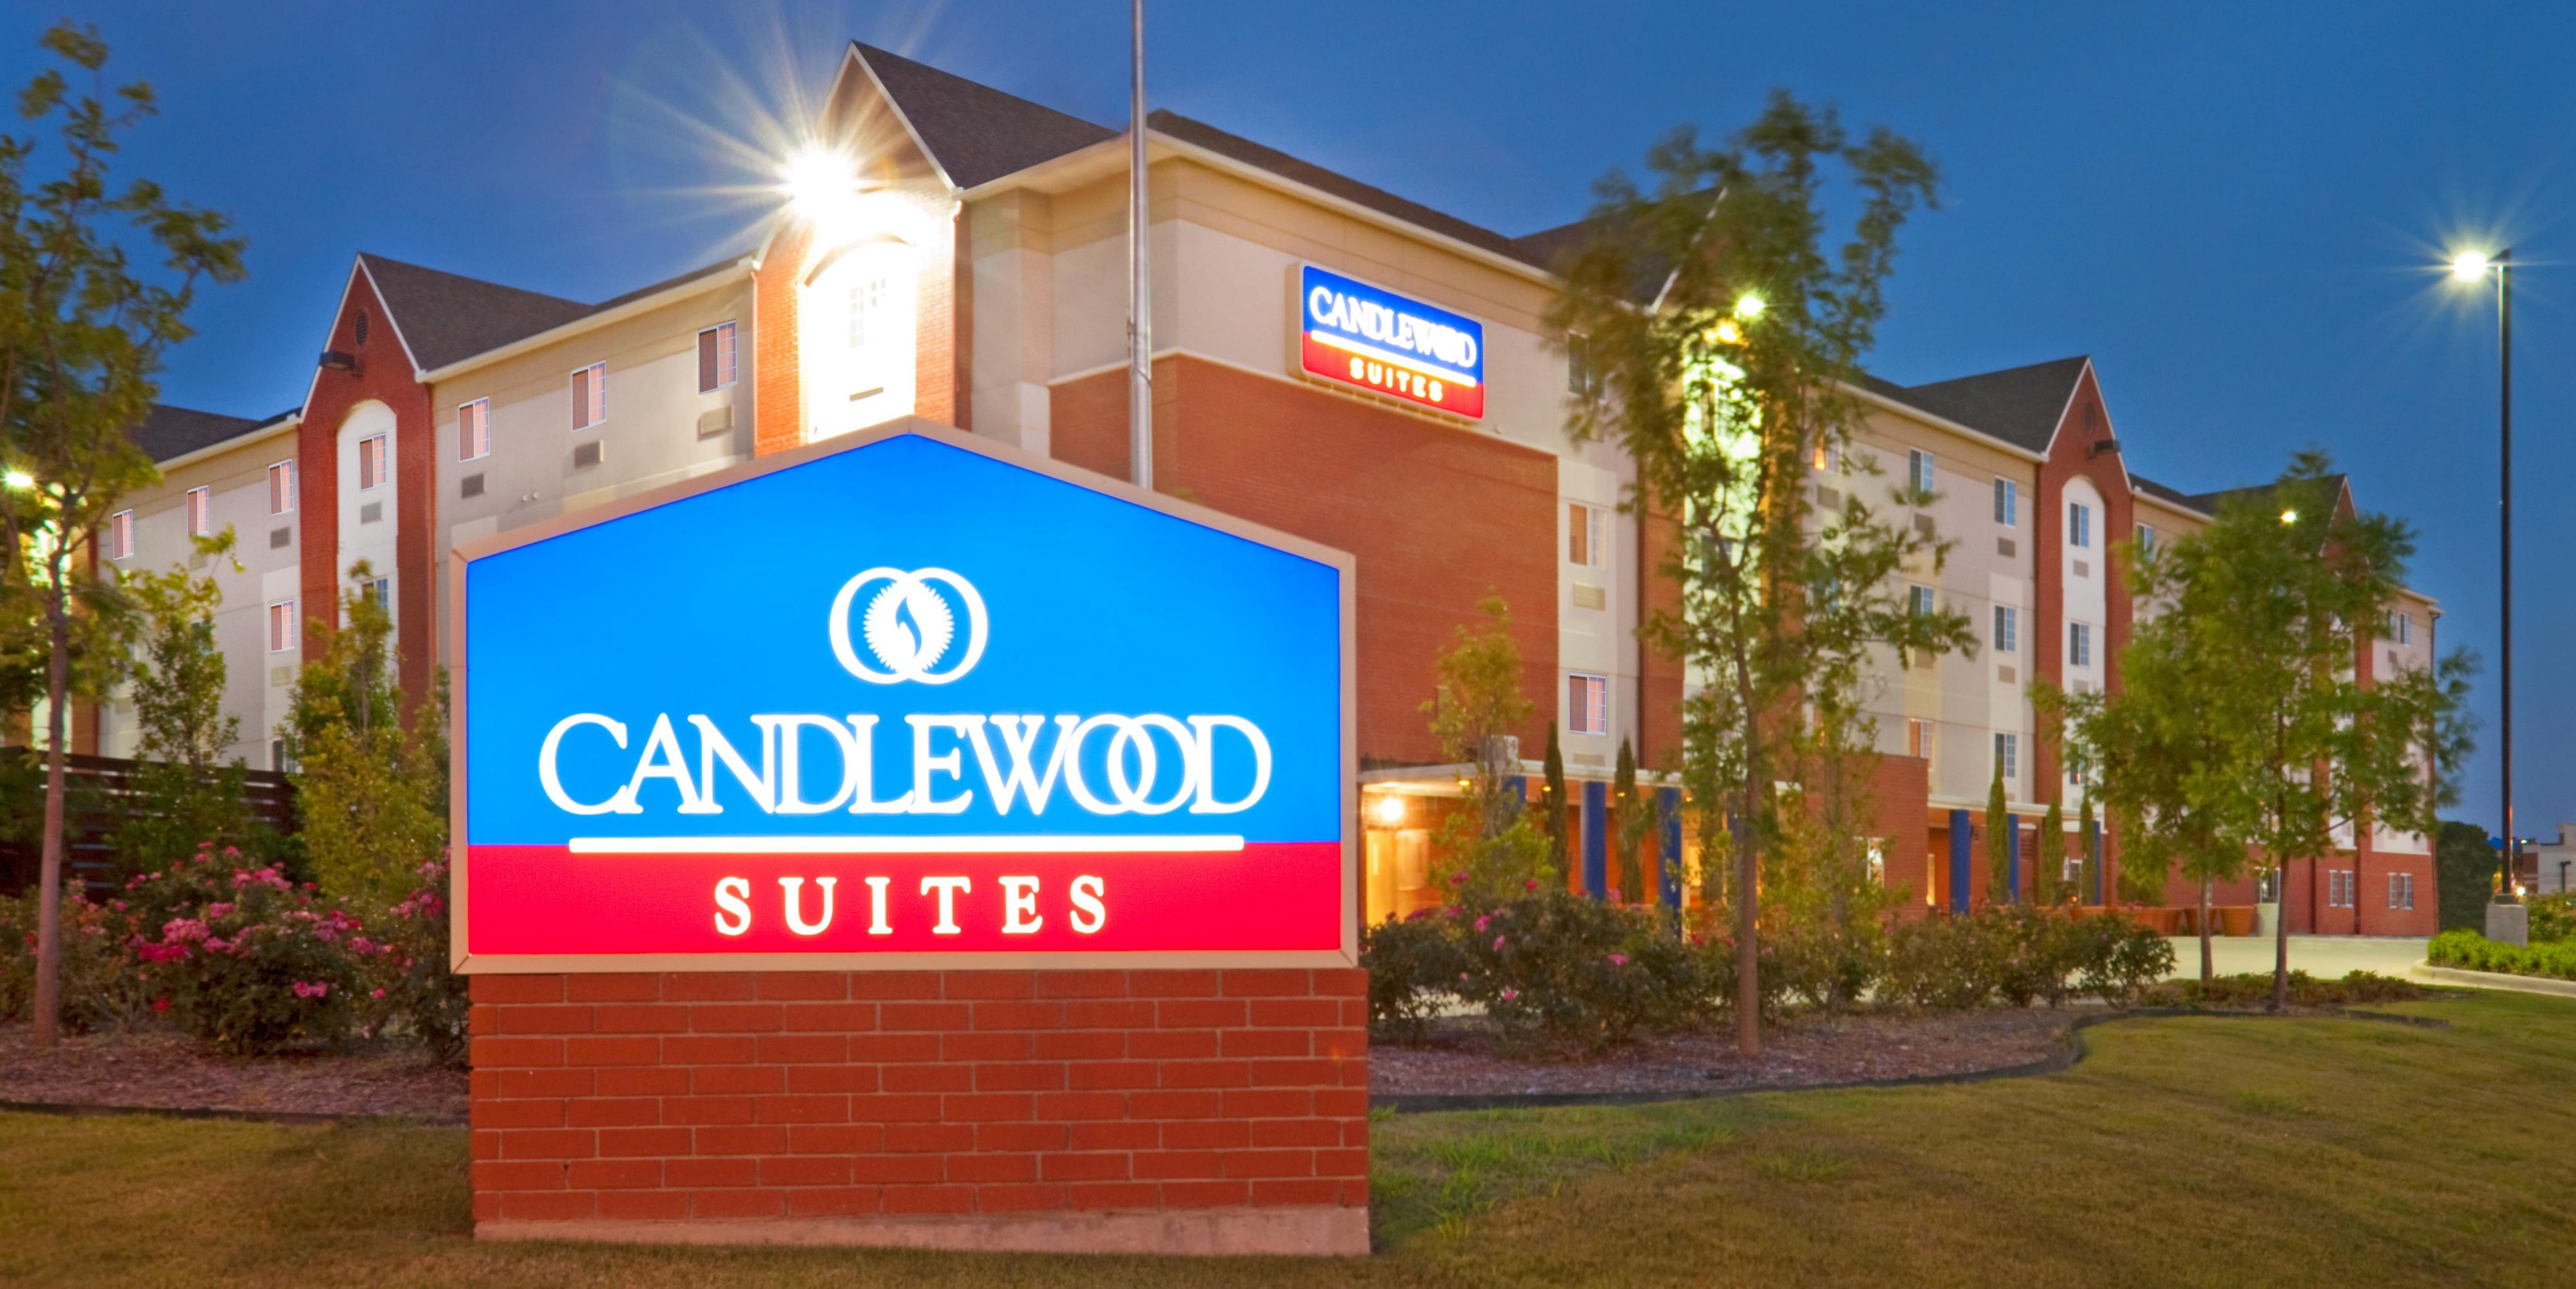 Candlewood Suites Fort Worth 3425466647 2x1